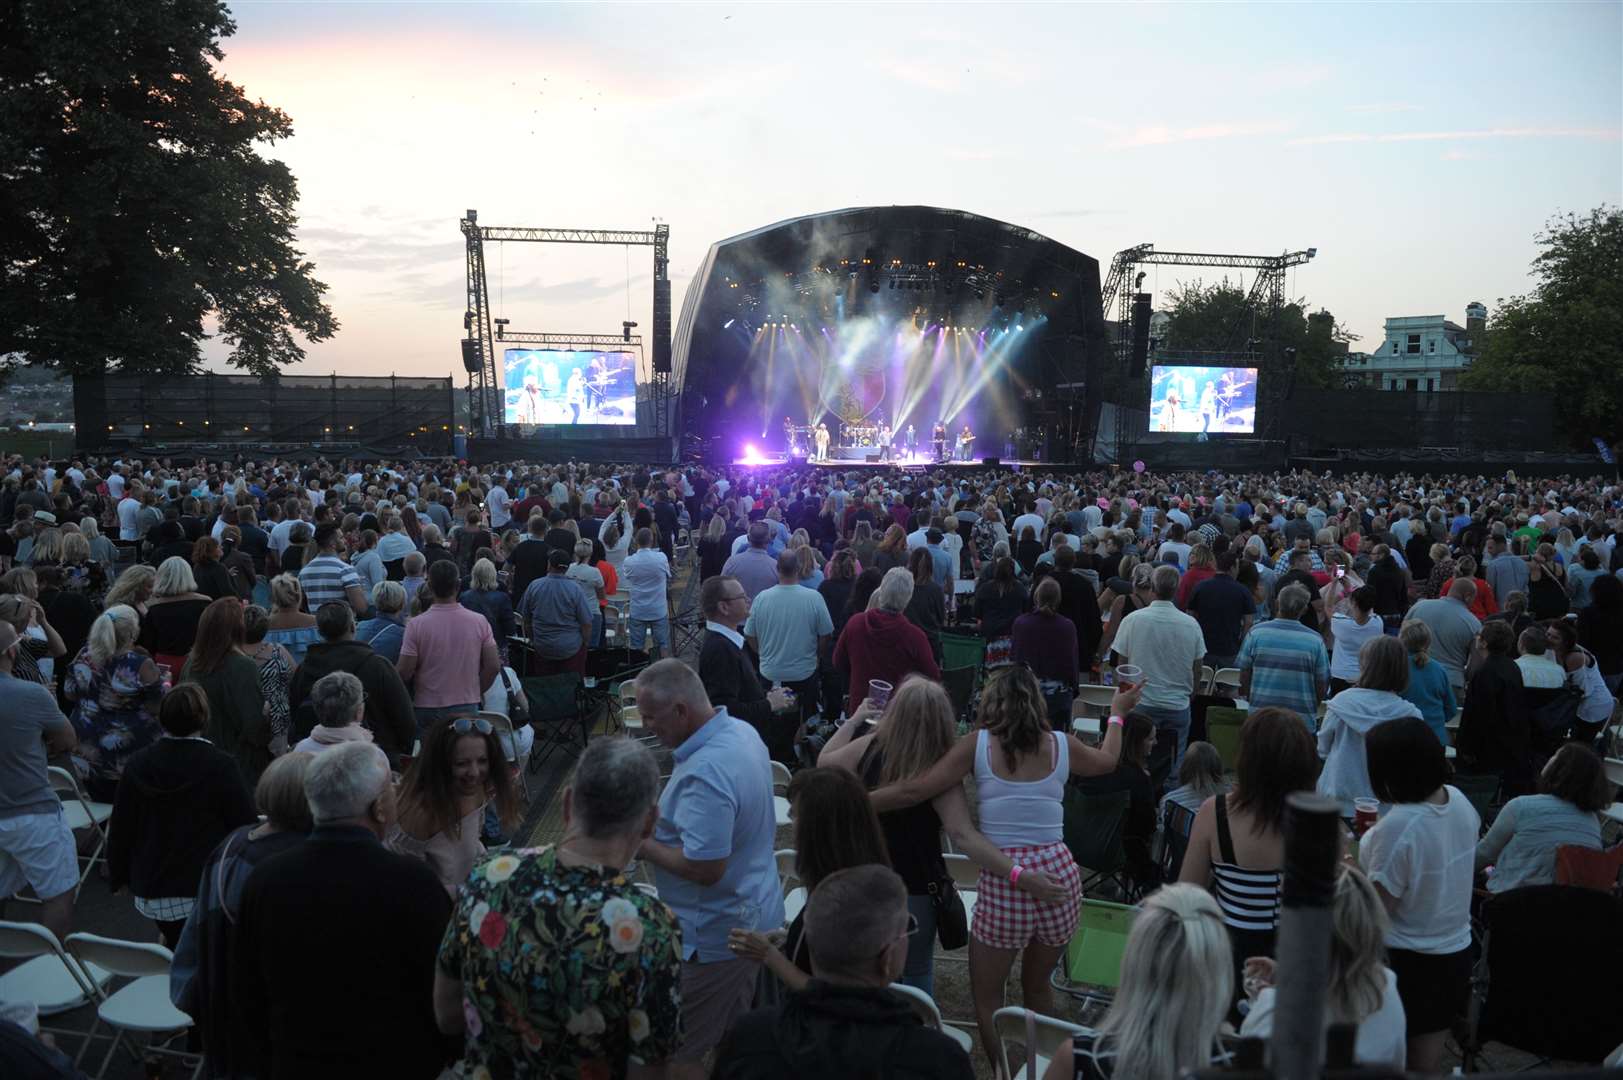 UB40 performing at Rochester Castle Concerts in 2018. Picture: Steve Crispe